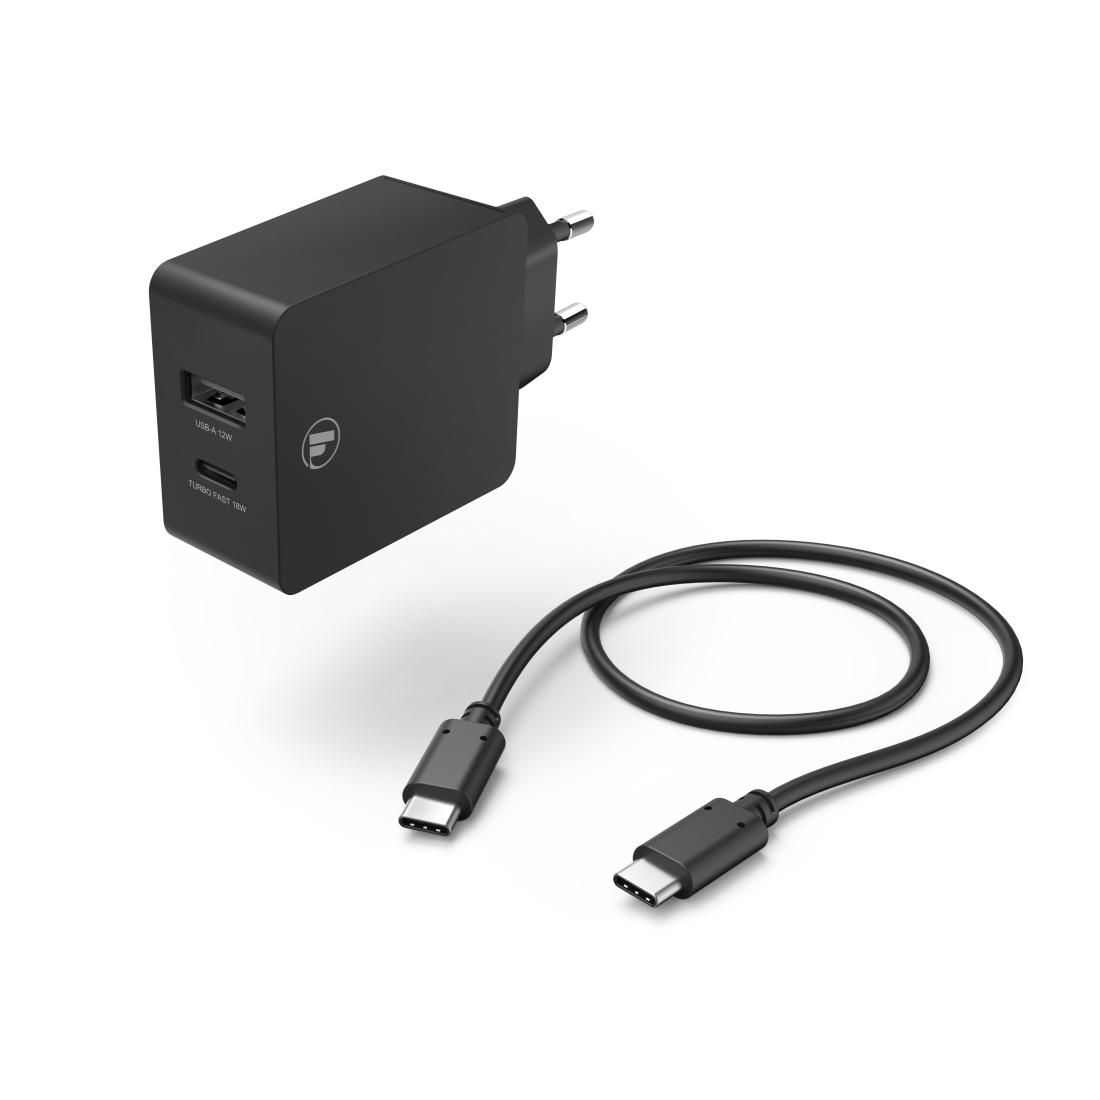 Hama 210521 W128281956 1 Mobile Device Charger Black 